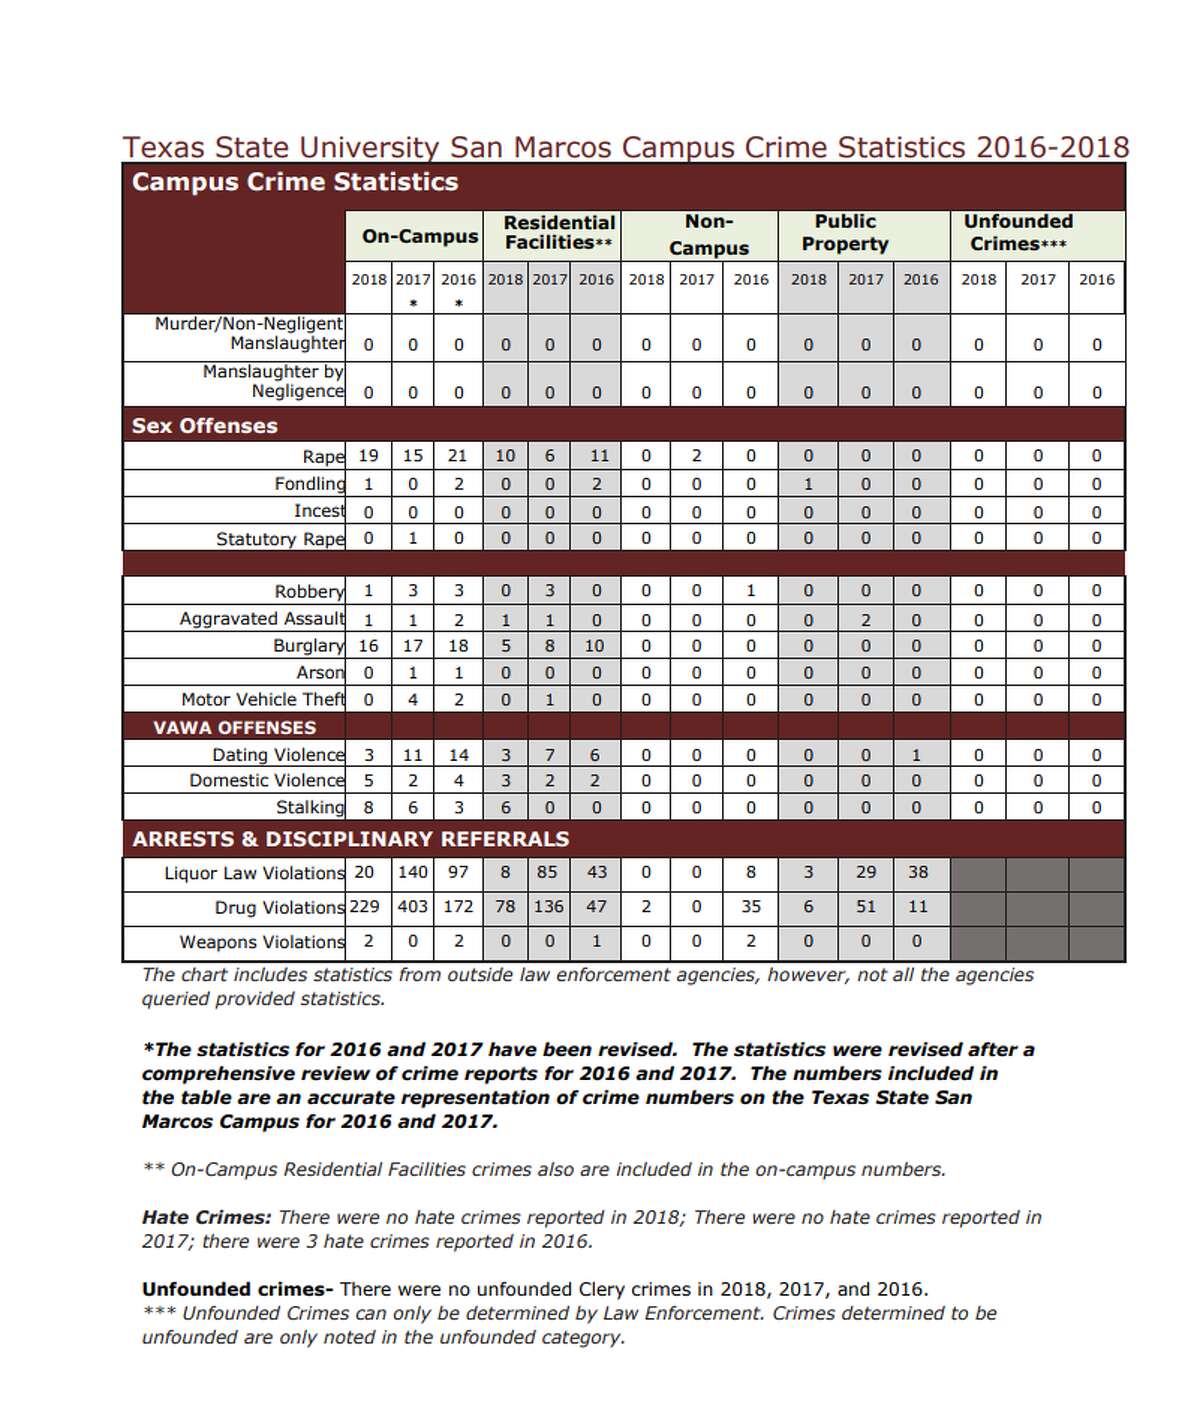 A copy of Texas State University's Annual Security and Fire Safety report, which suggests the number of rapes in previous years were under reported and updated in this report.